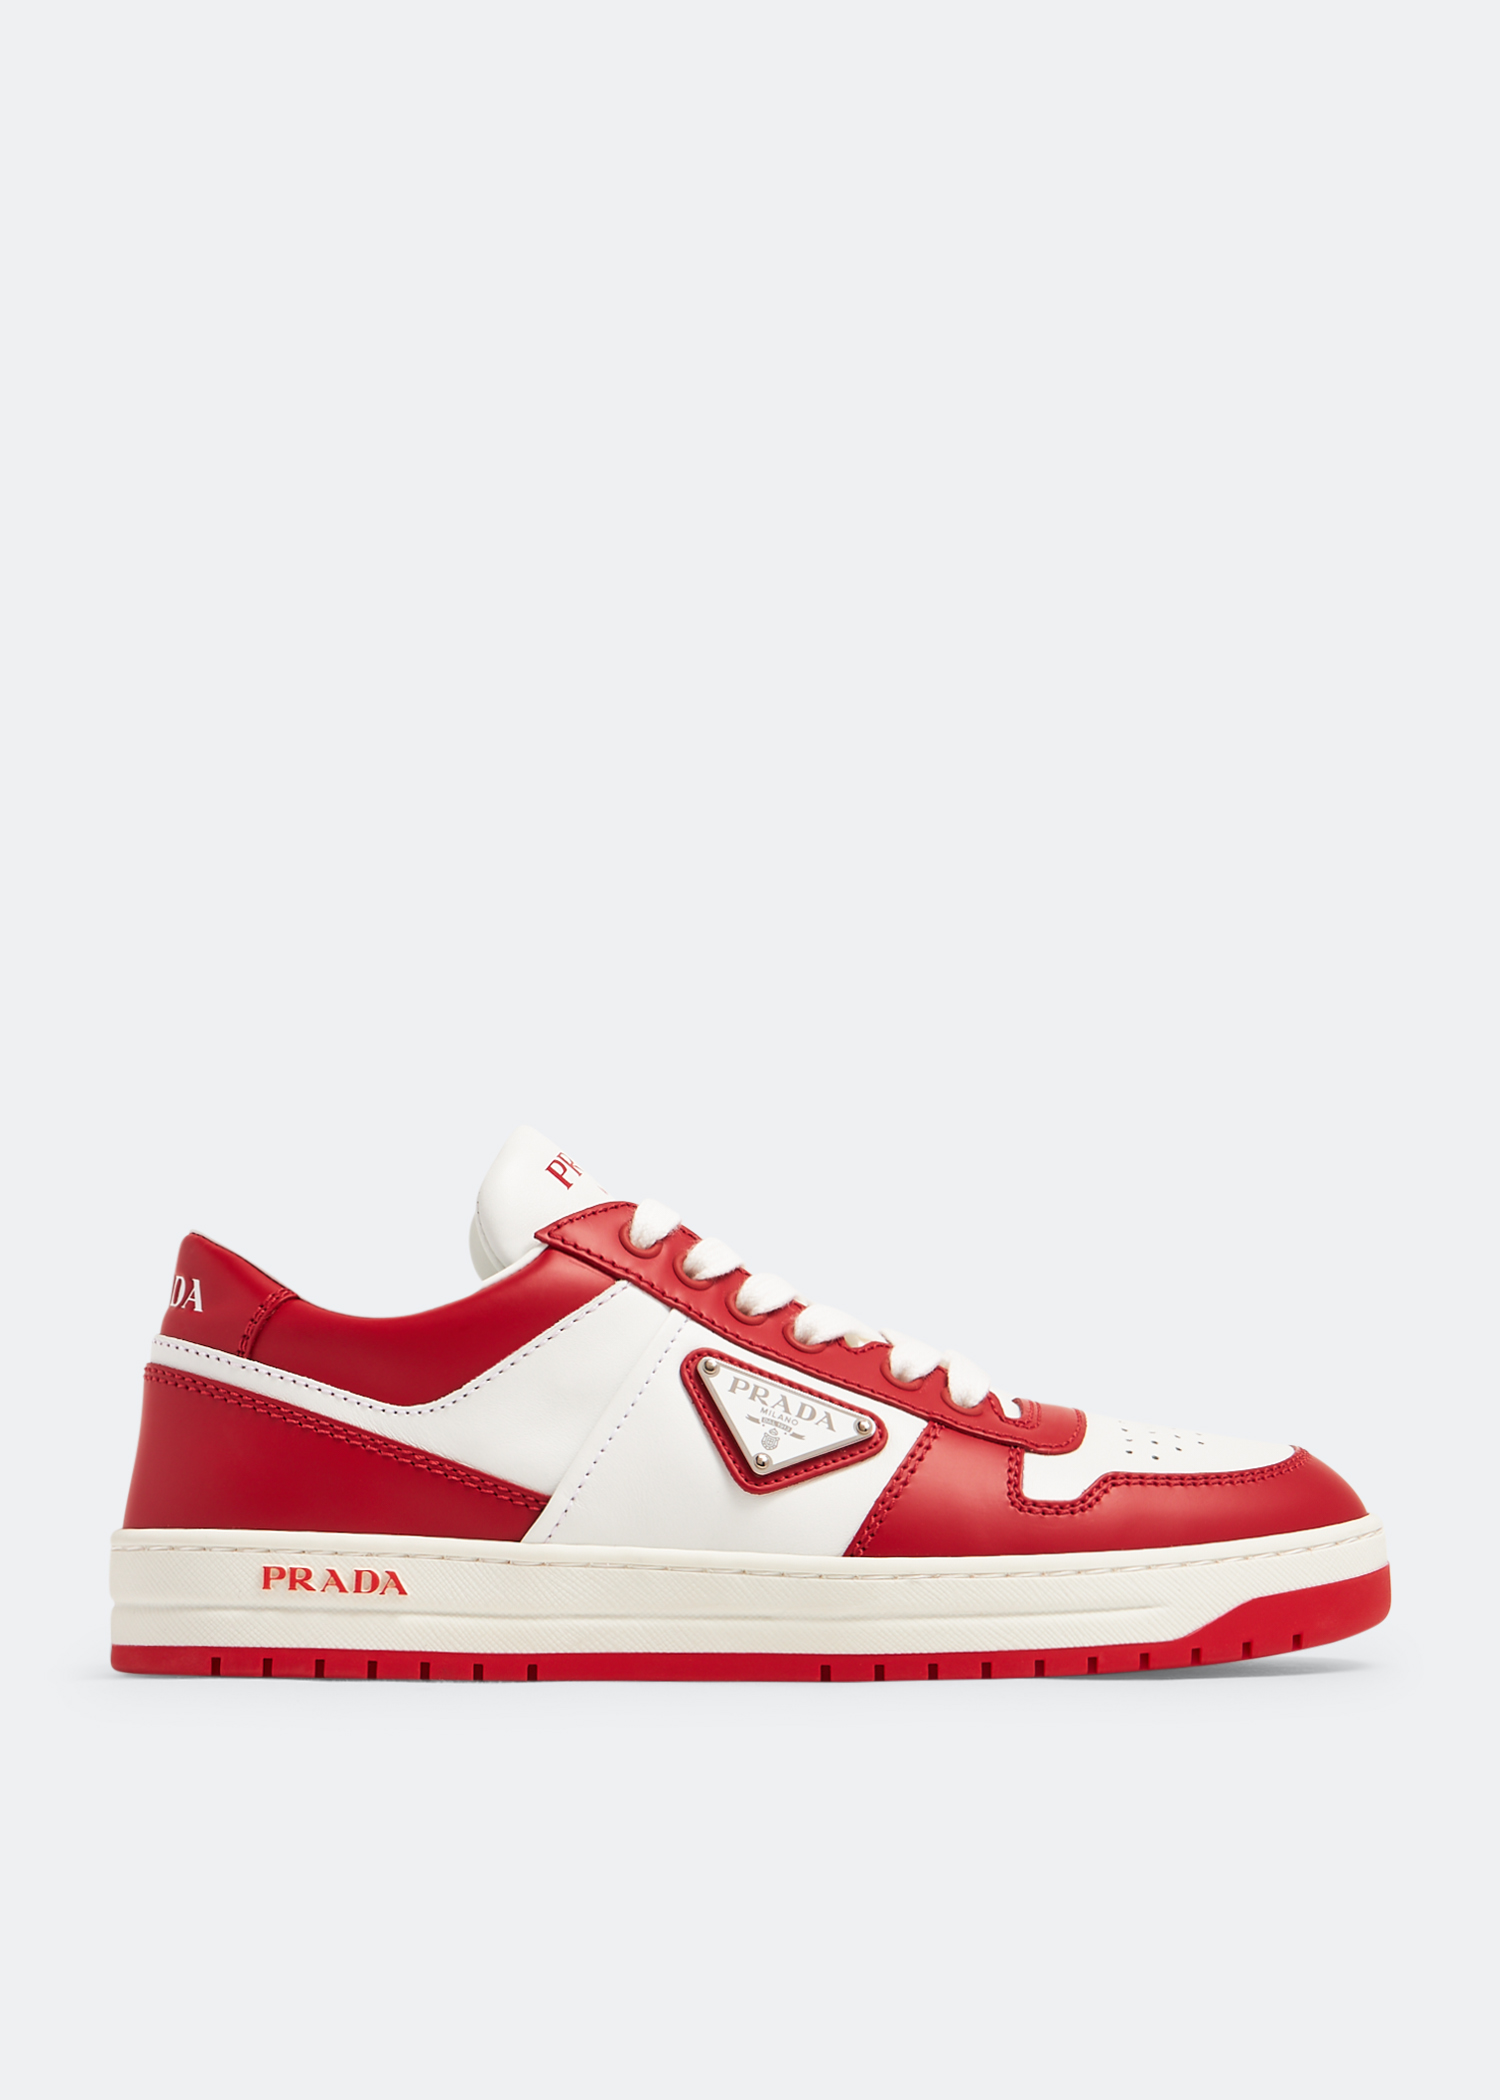 Prada Downtown leather sneakers for Women - Red in Kuwait | Level 